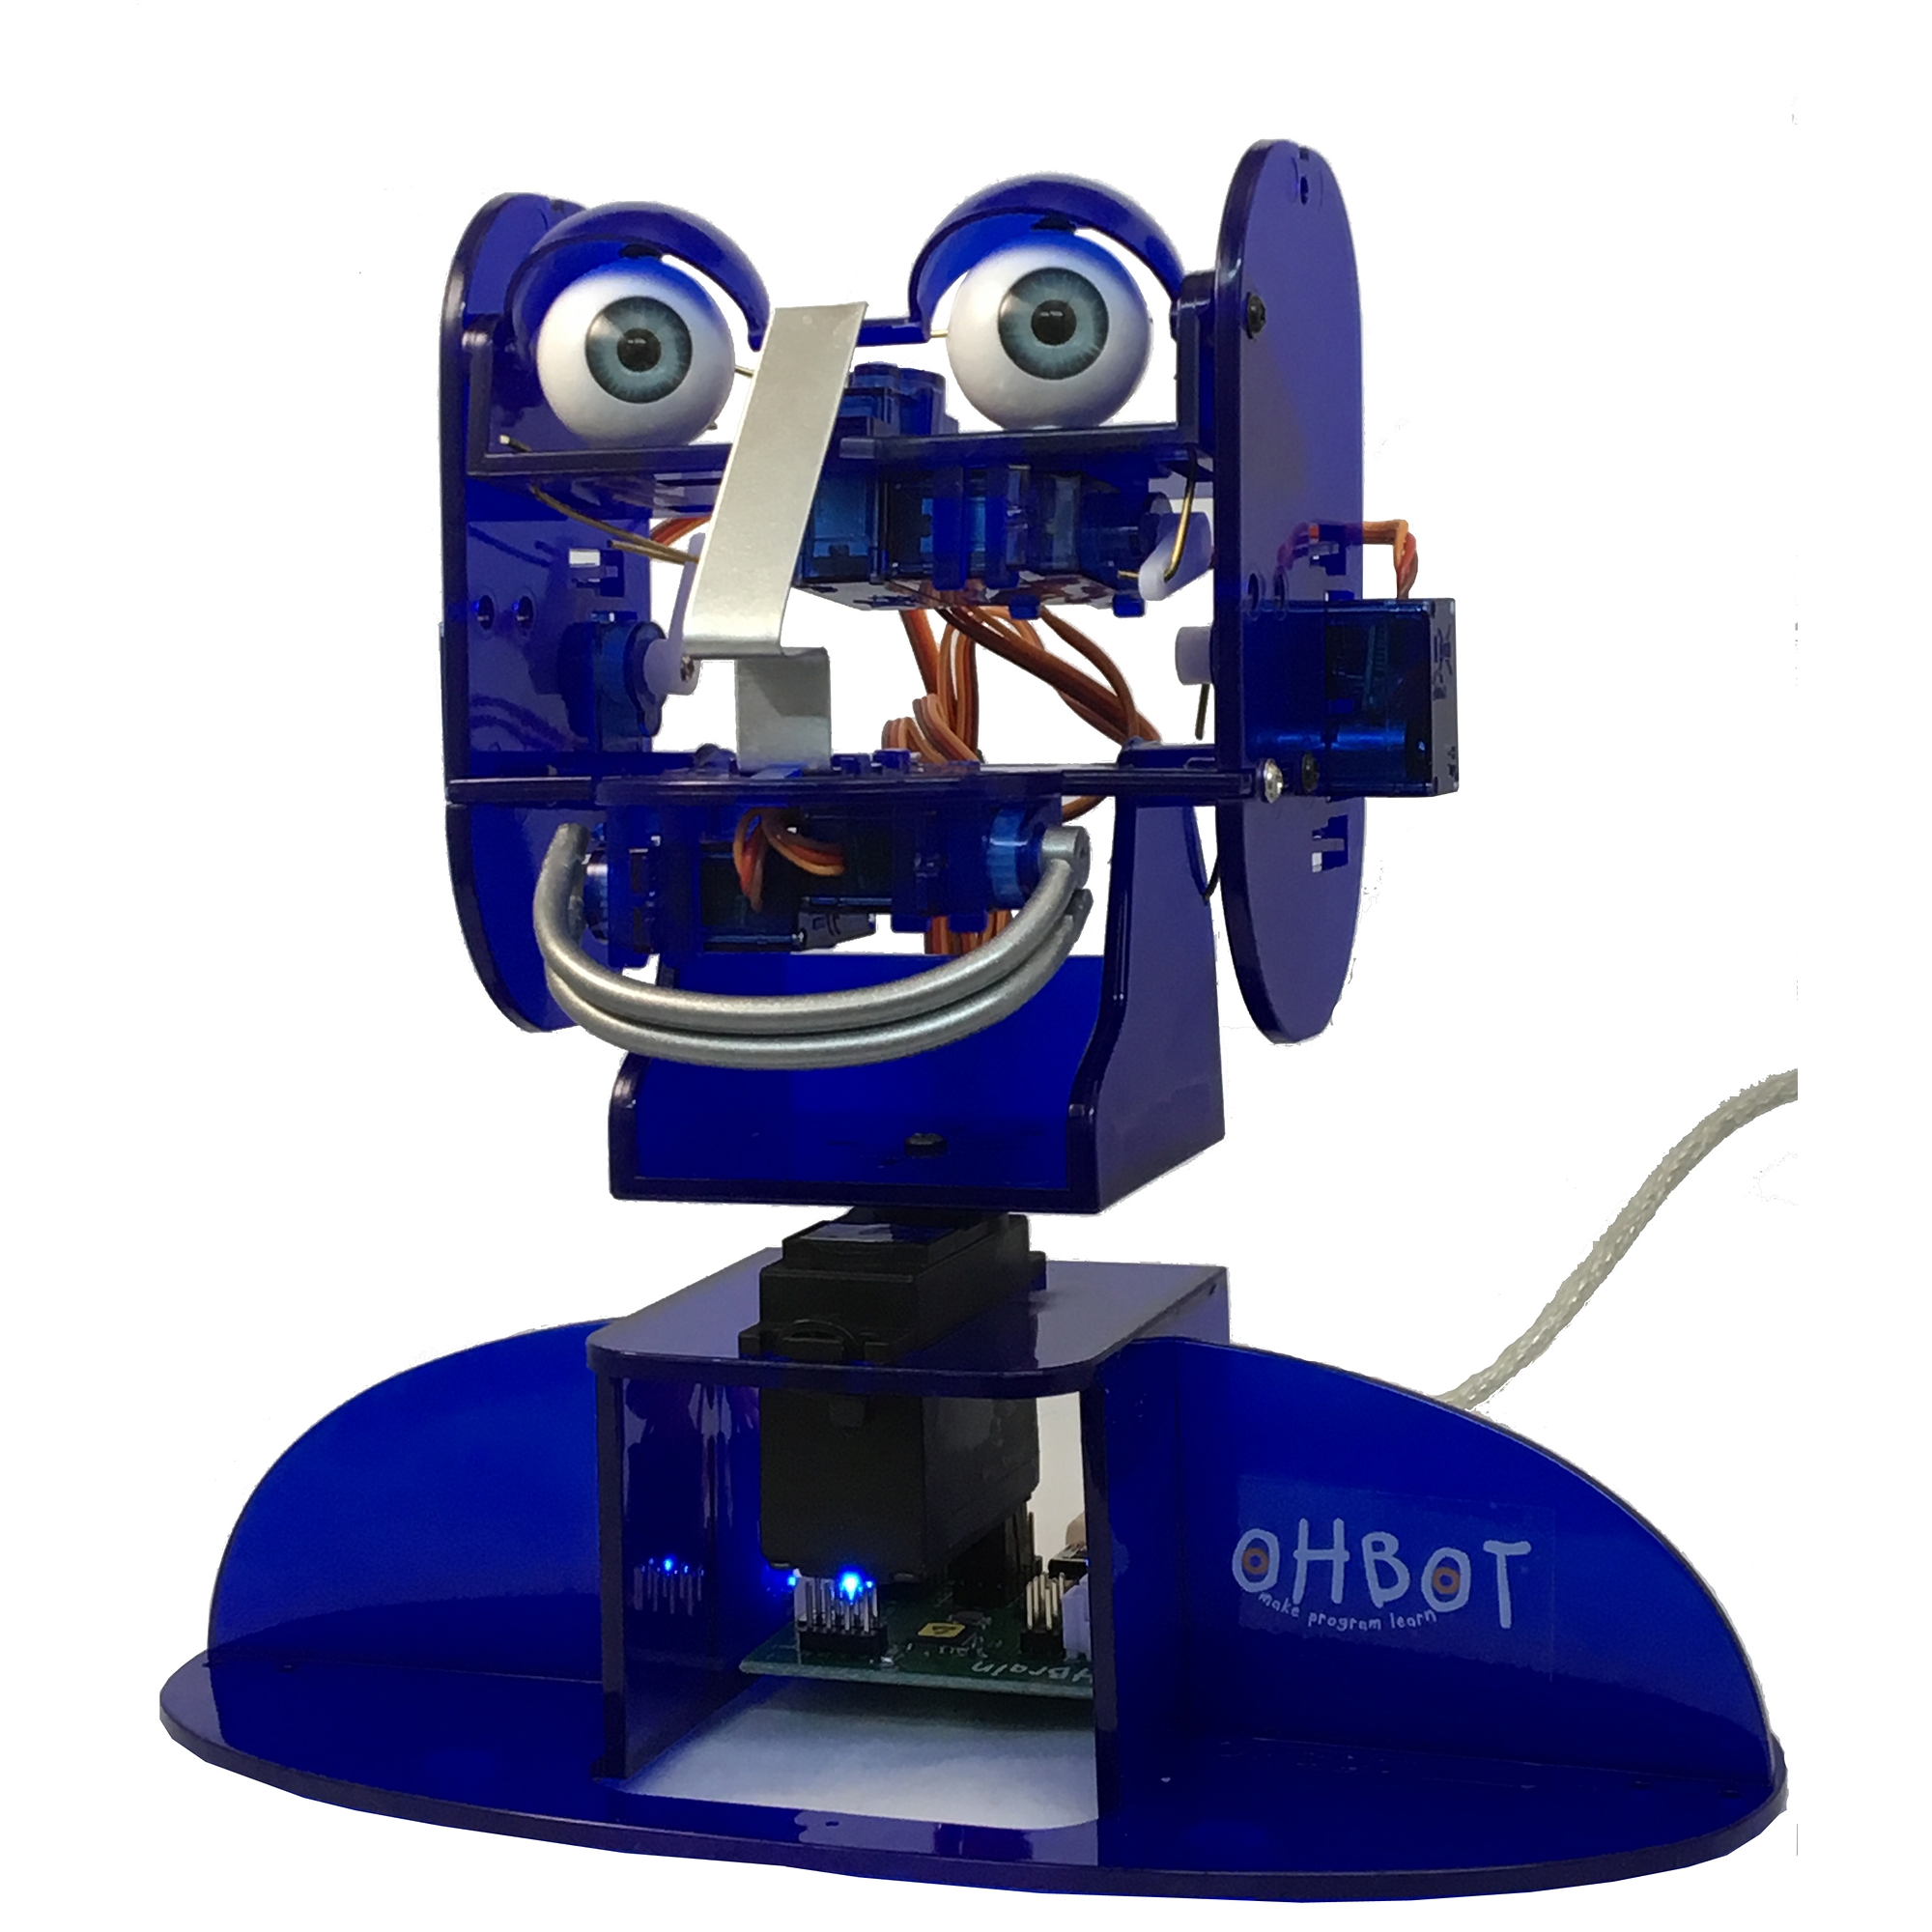 Ohbot 2.1 Educational Robot Kit with 4 user software licence for Windows